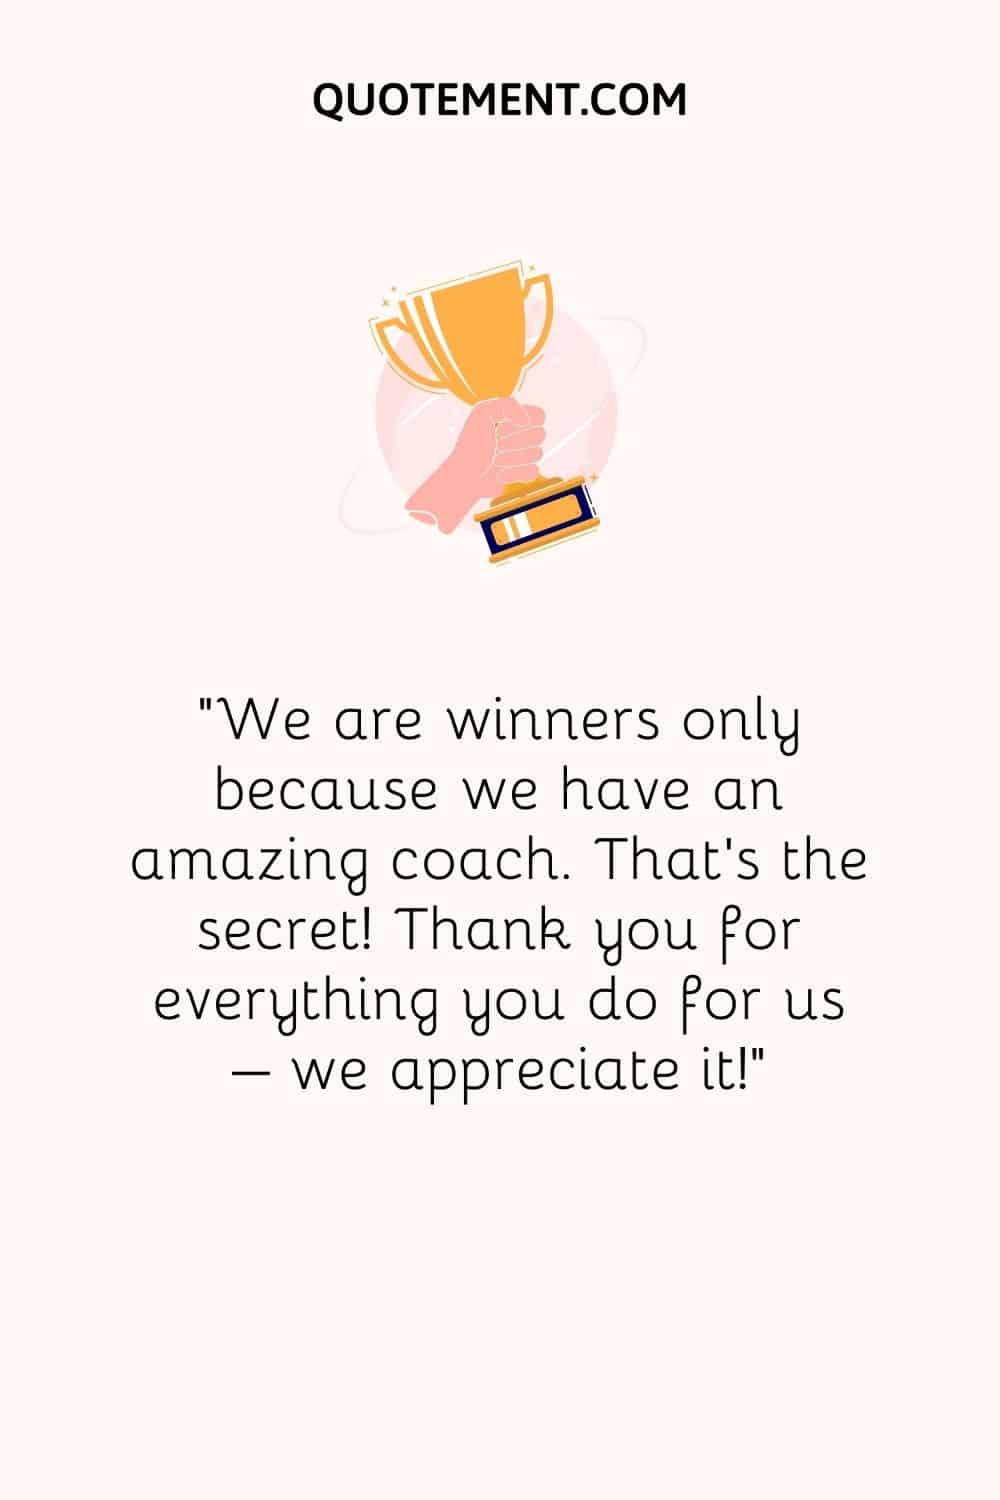 We are winners only because we have an amazing coach